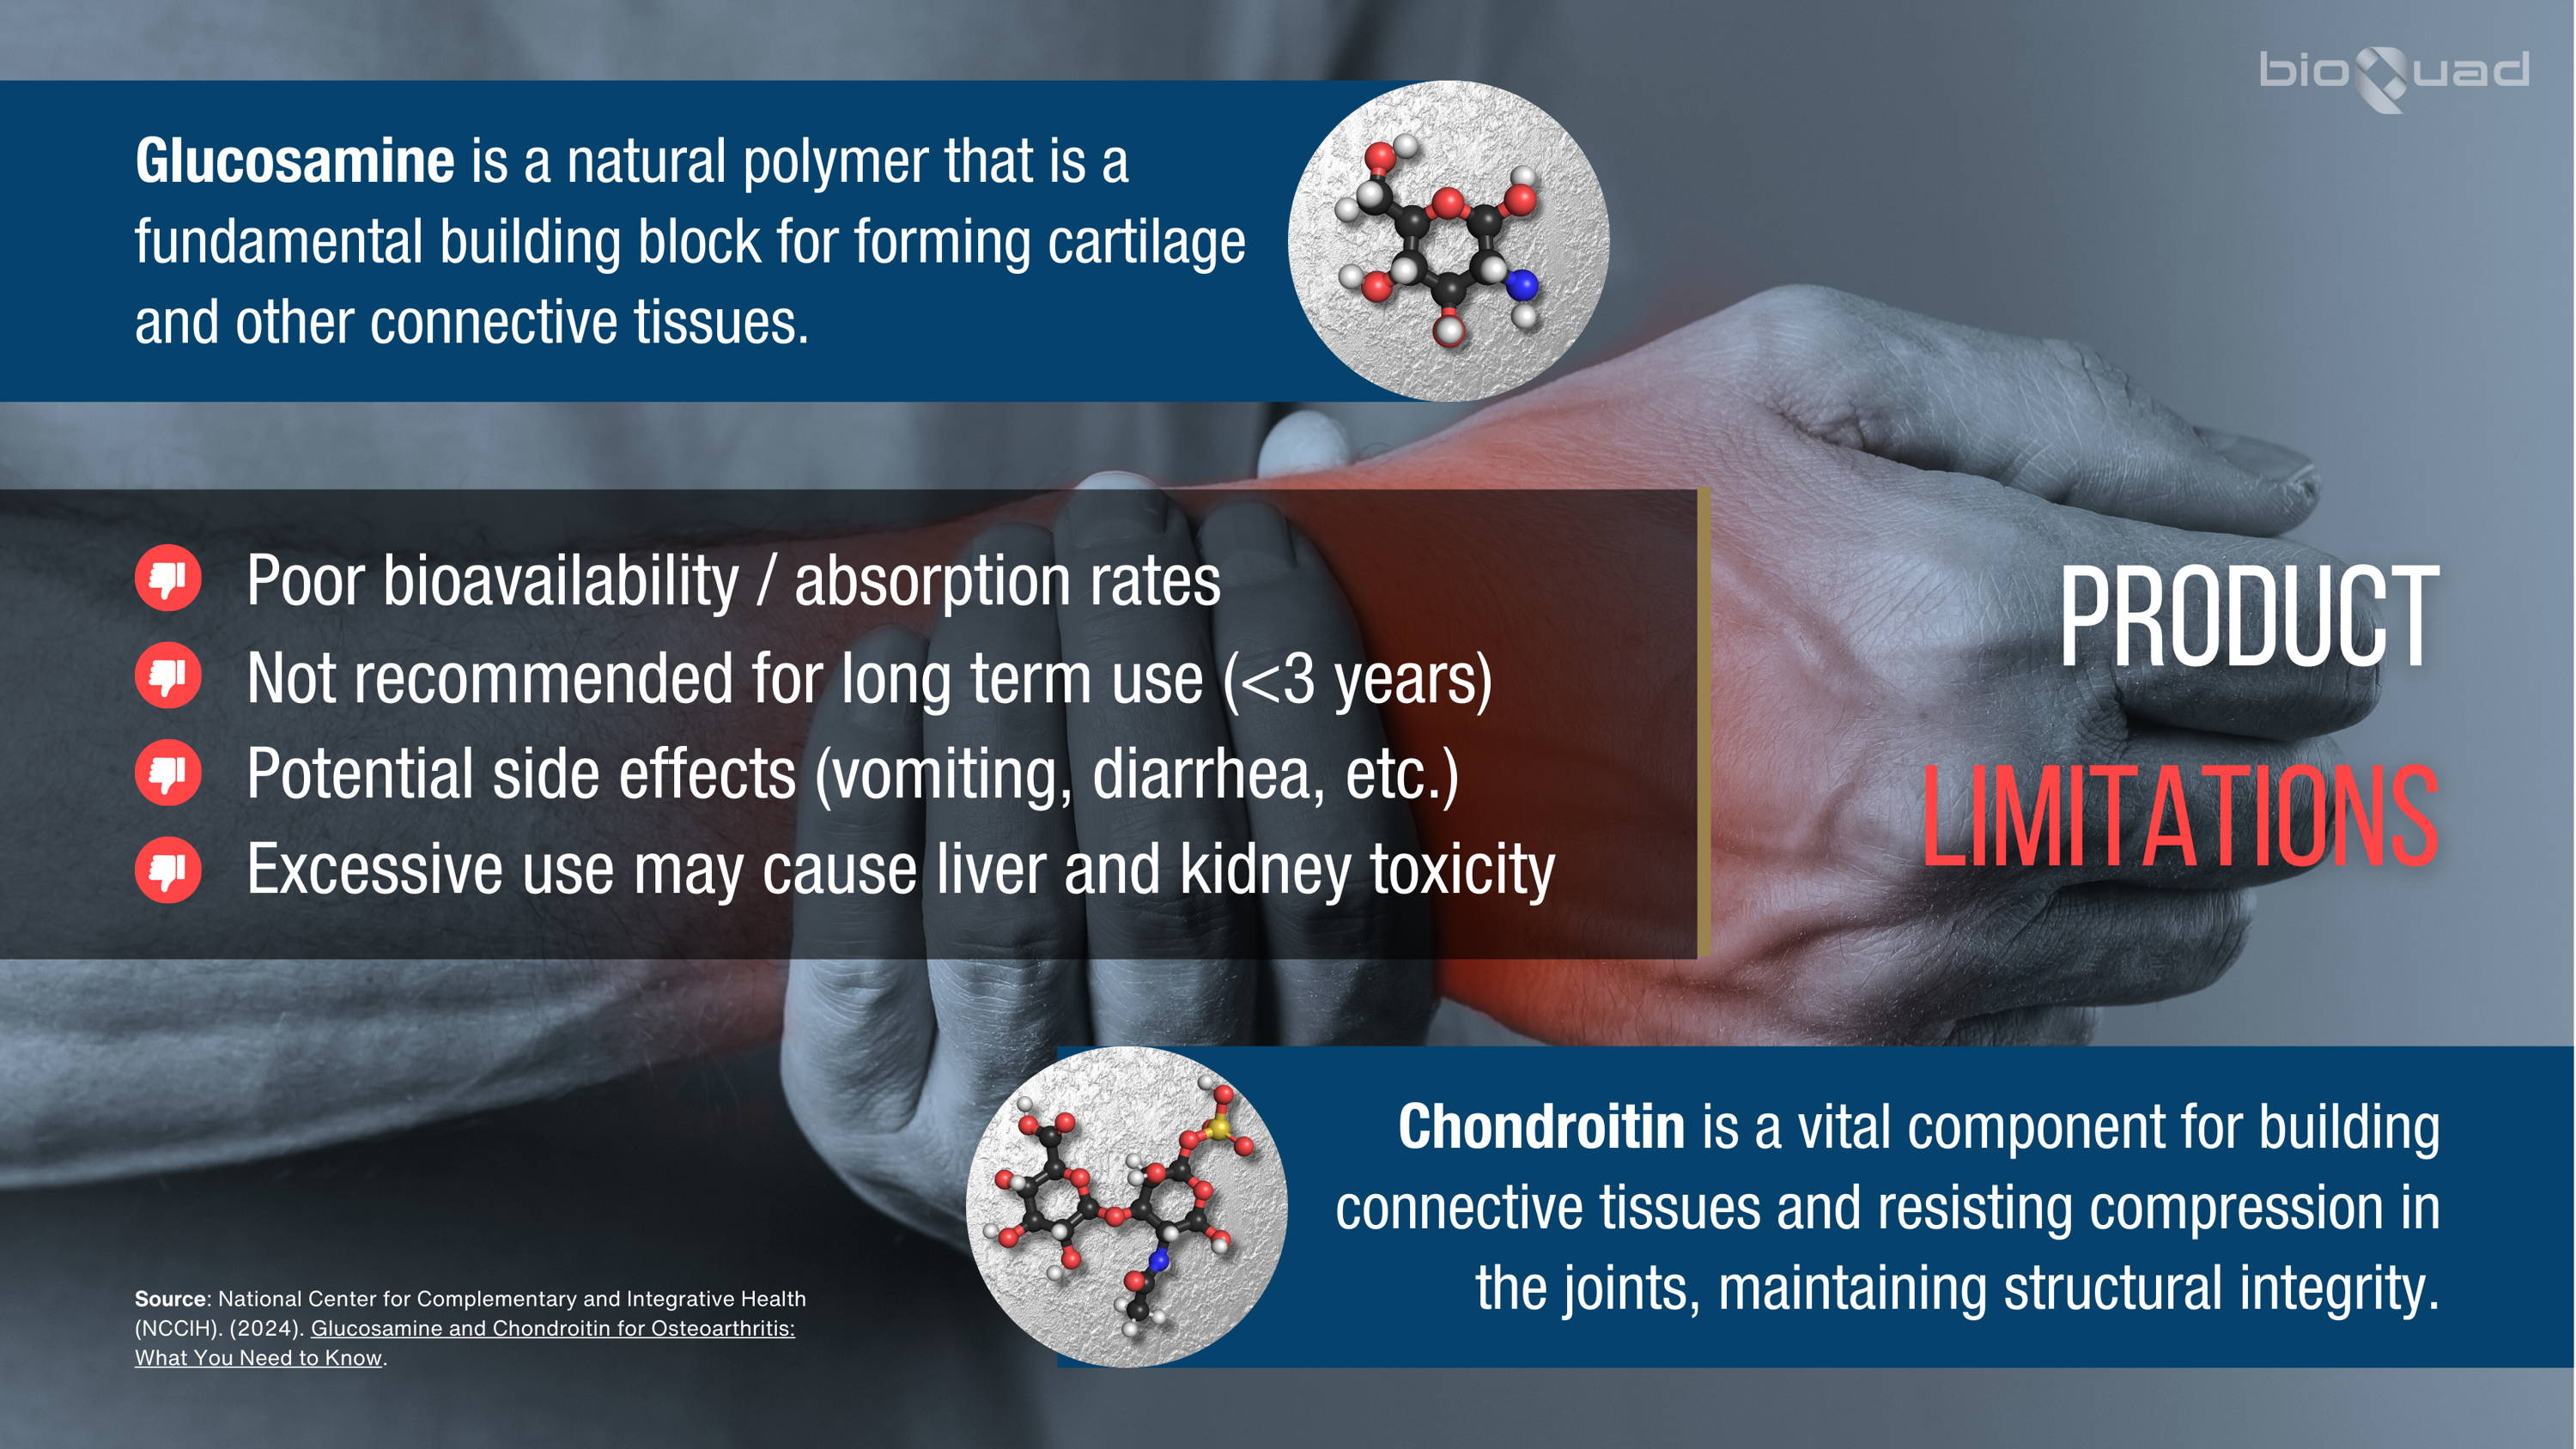 Infographic detailing the limitations of glucosamine and chondroitin supplements, including poor bioavailability, risks of long-term use, potential side effects, and the possibility of liver and kidney toxicity, with molecular structures of each supplement.